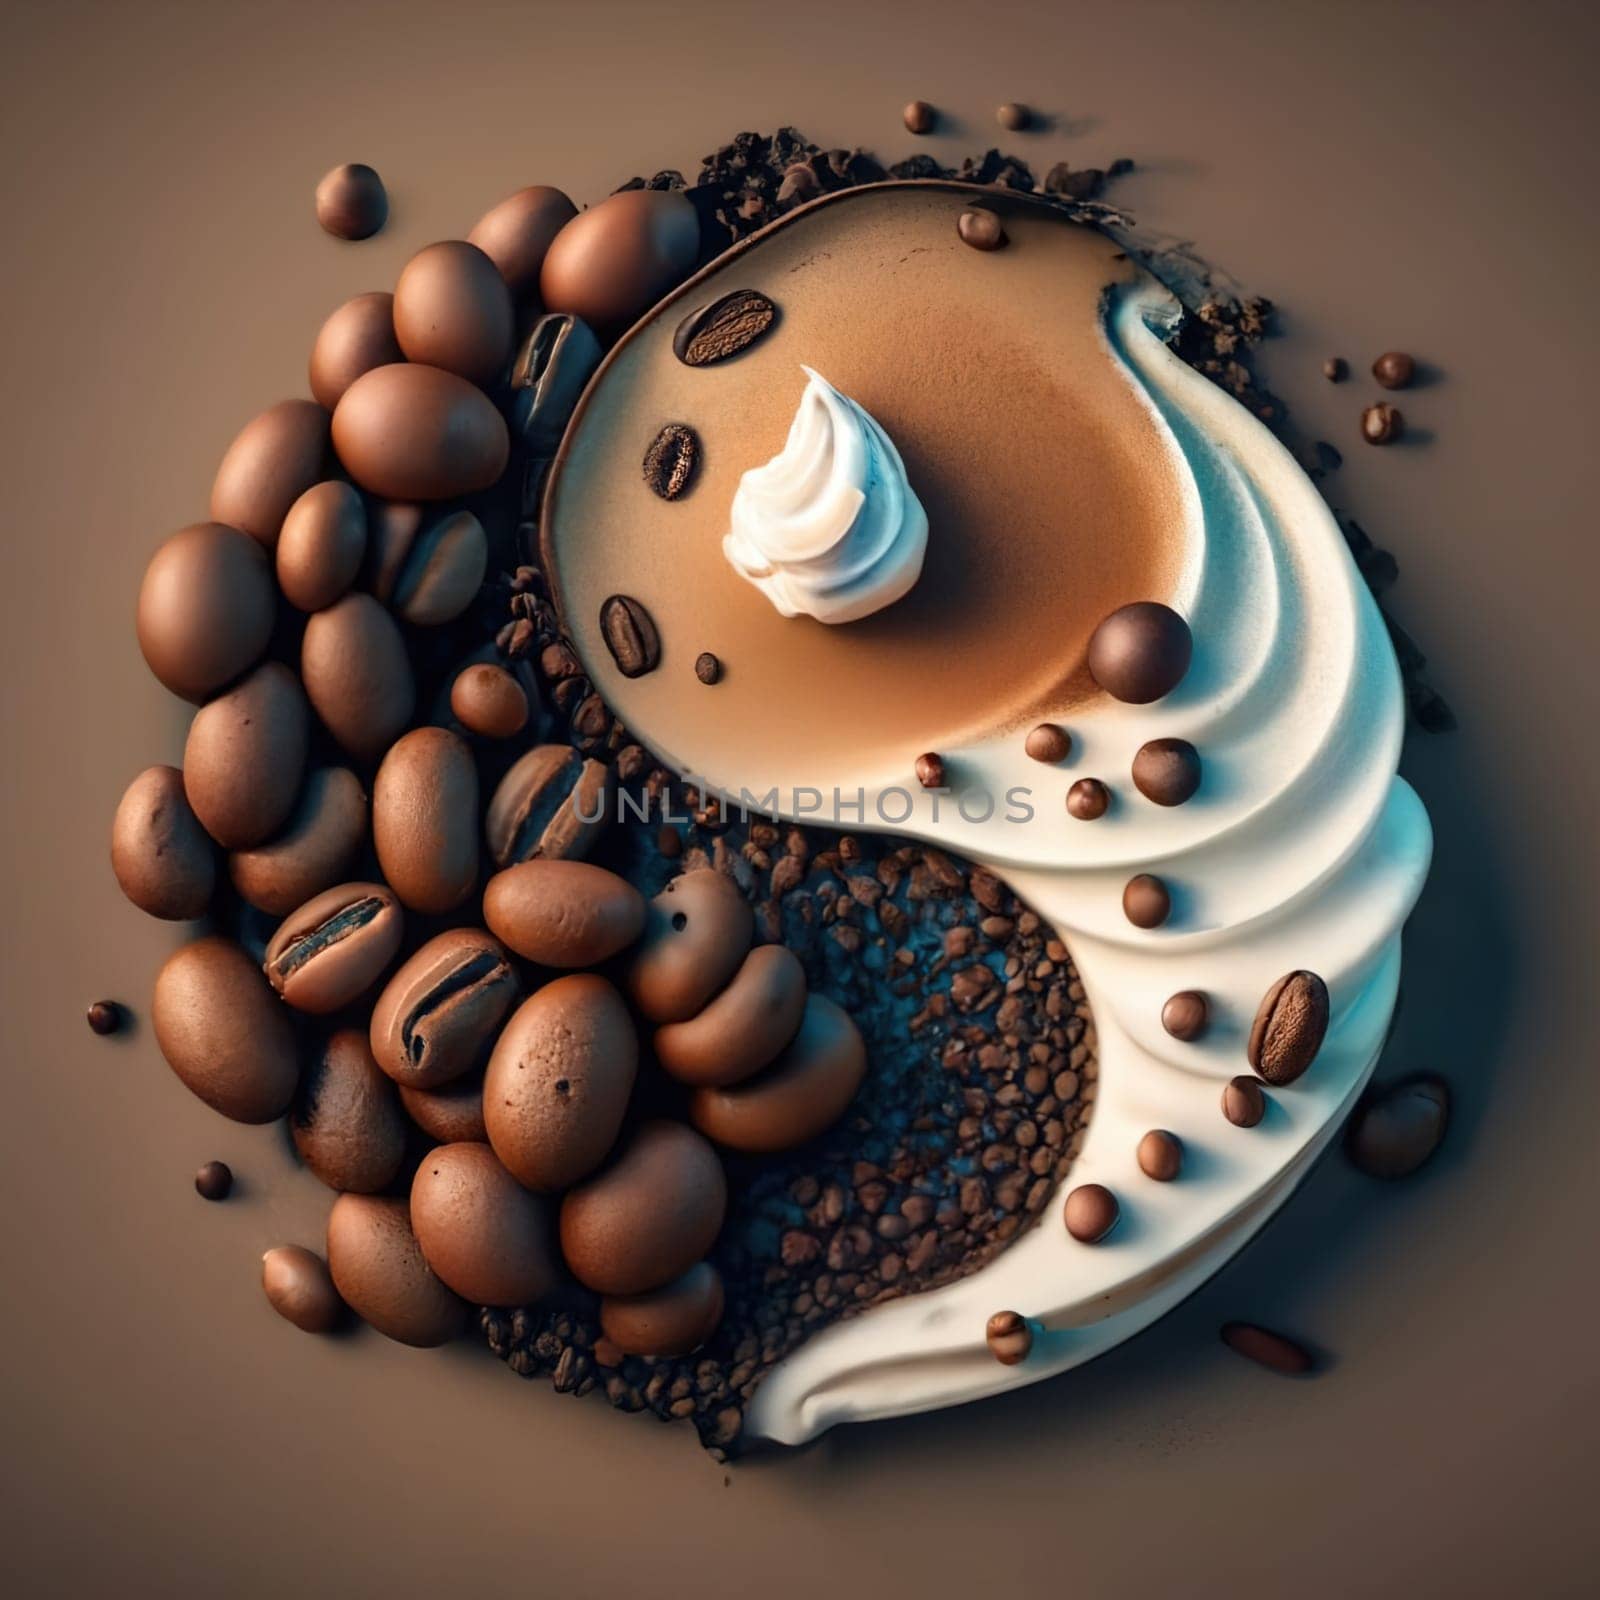 Yin-Yang Coffee Art: Symbol Created with Black Coffee and Whipped Cream - Creative Concept in Food Art download image